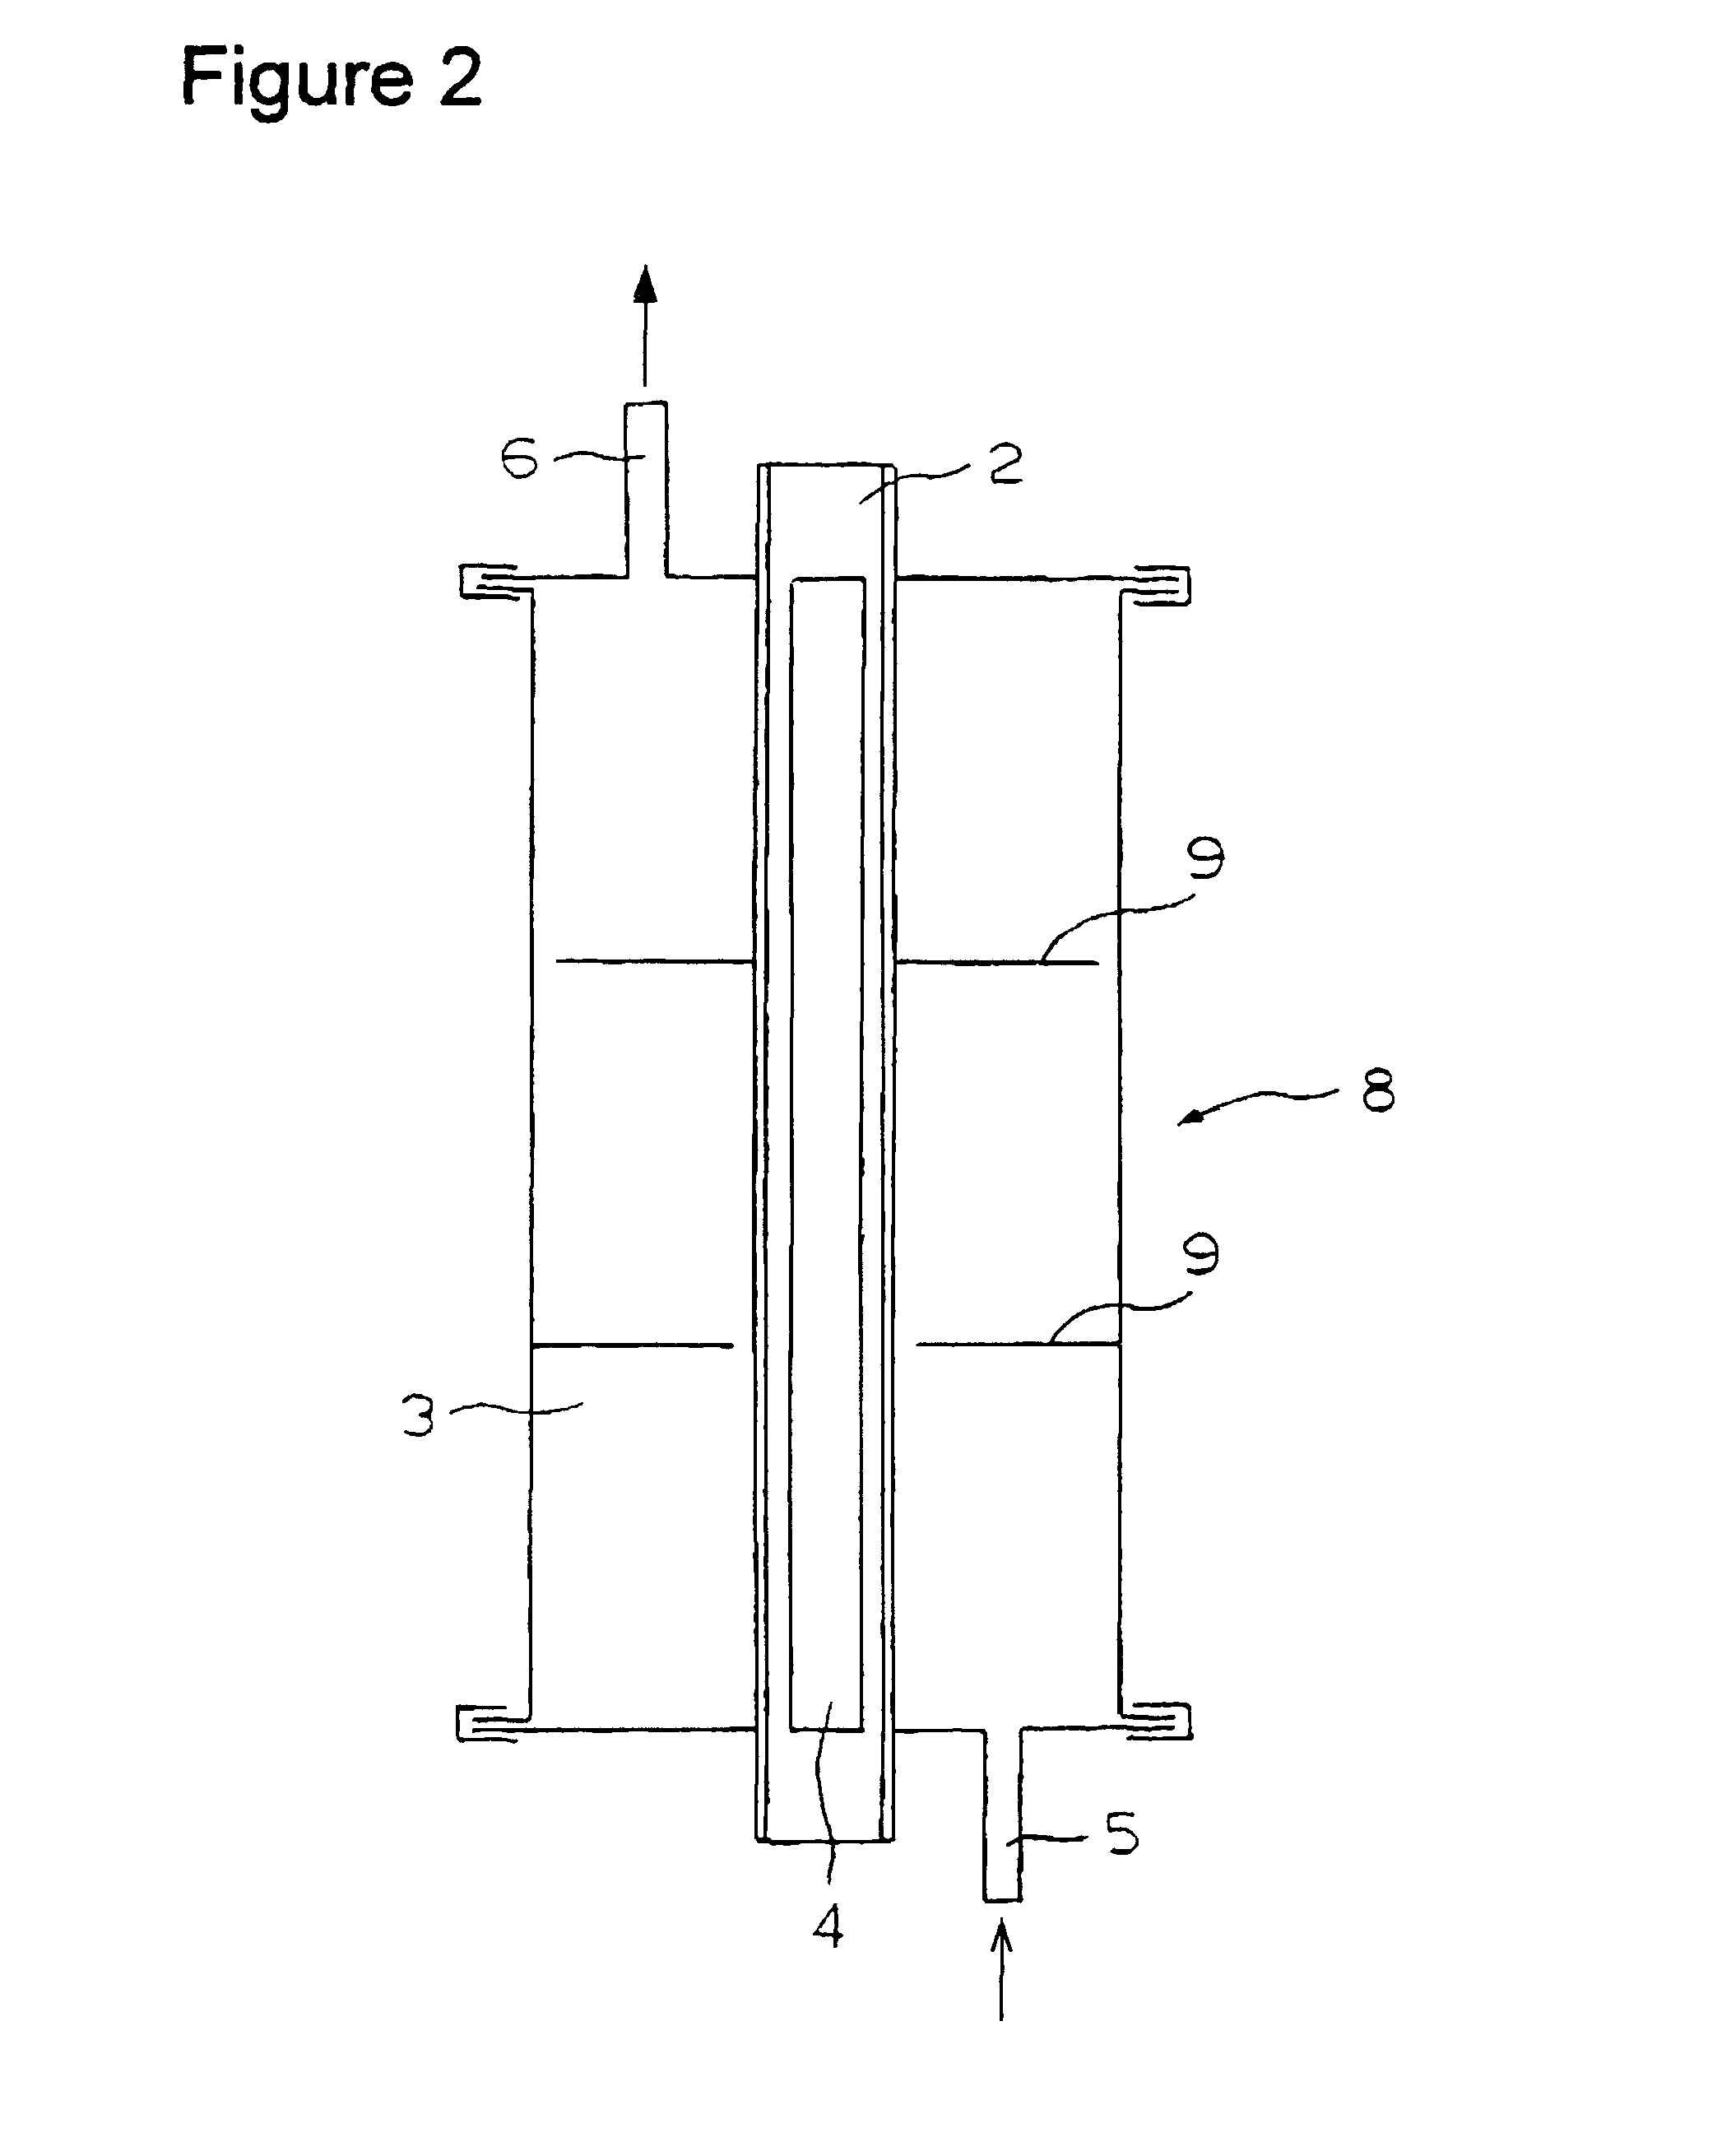 Photolytic device for breakdown of organic chlorine compounds